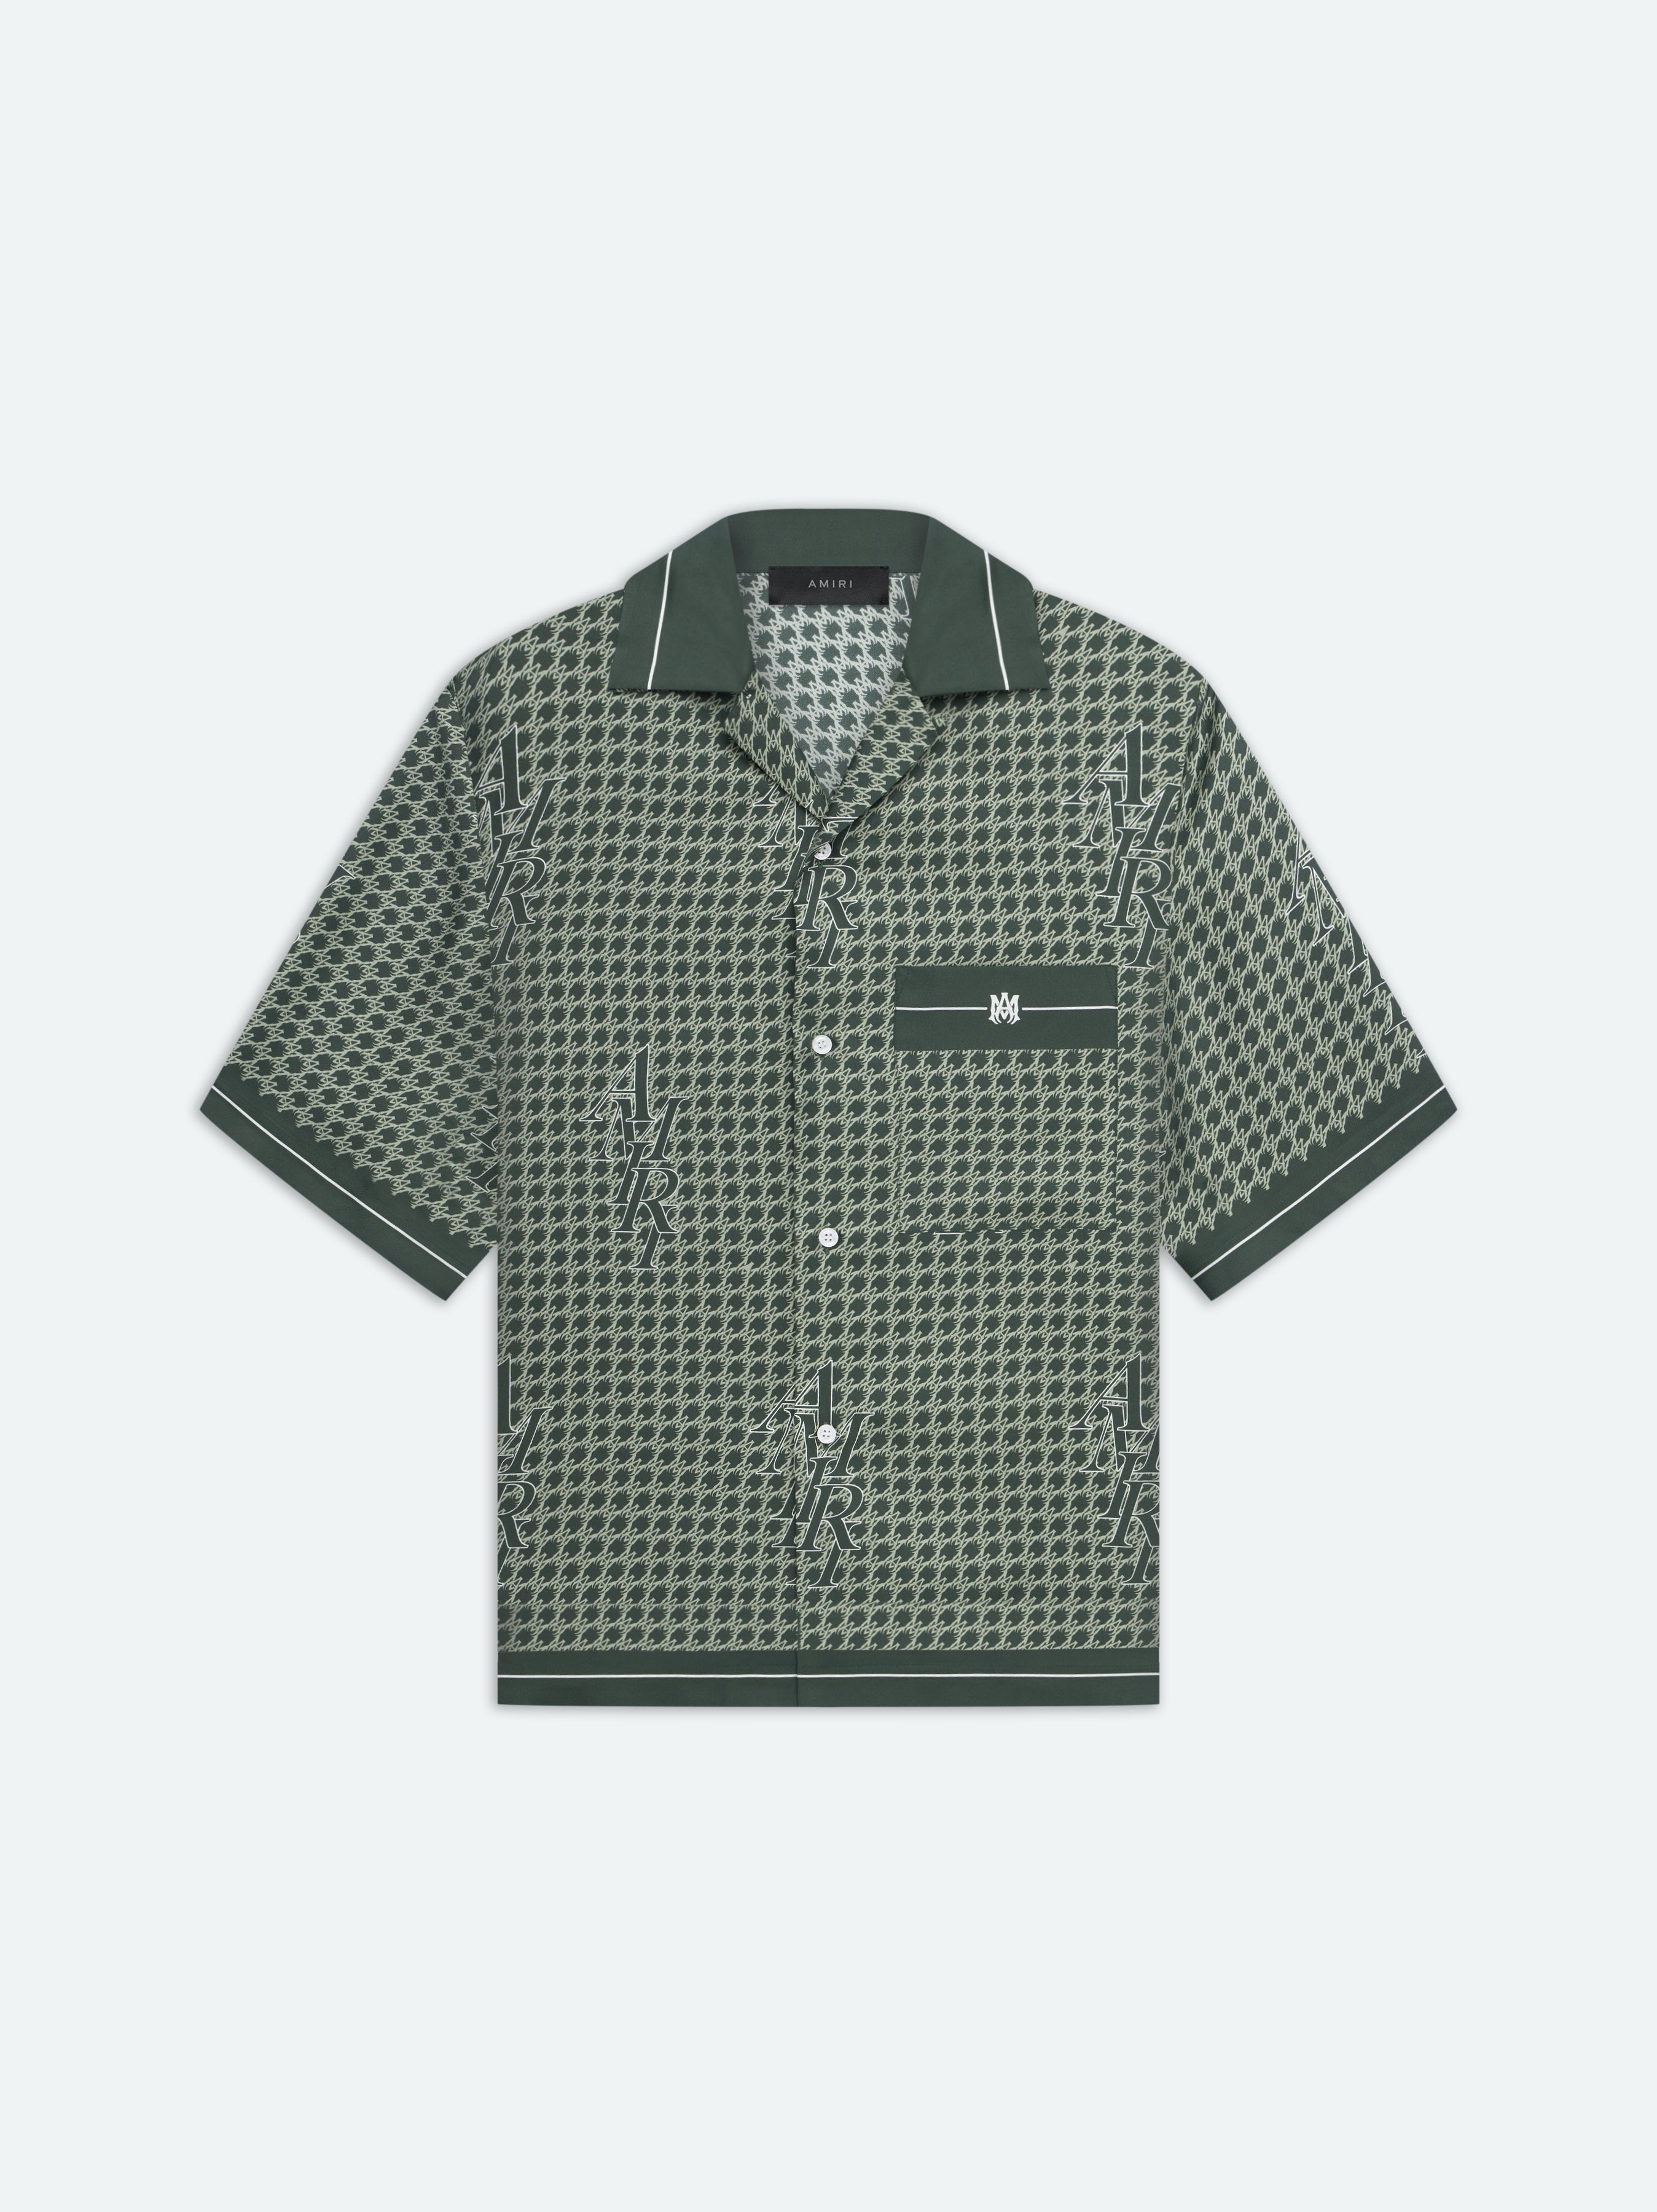 Product AMIRI HOUNDSTOOTH BOWLING SHIRT - Rain Forest featured image